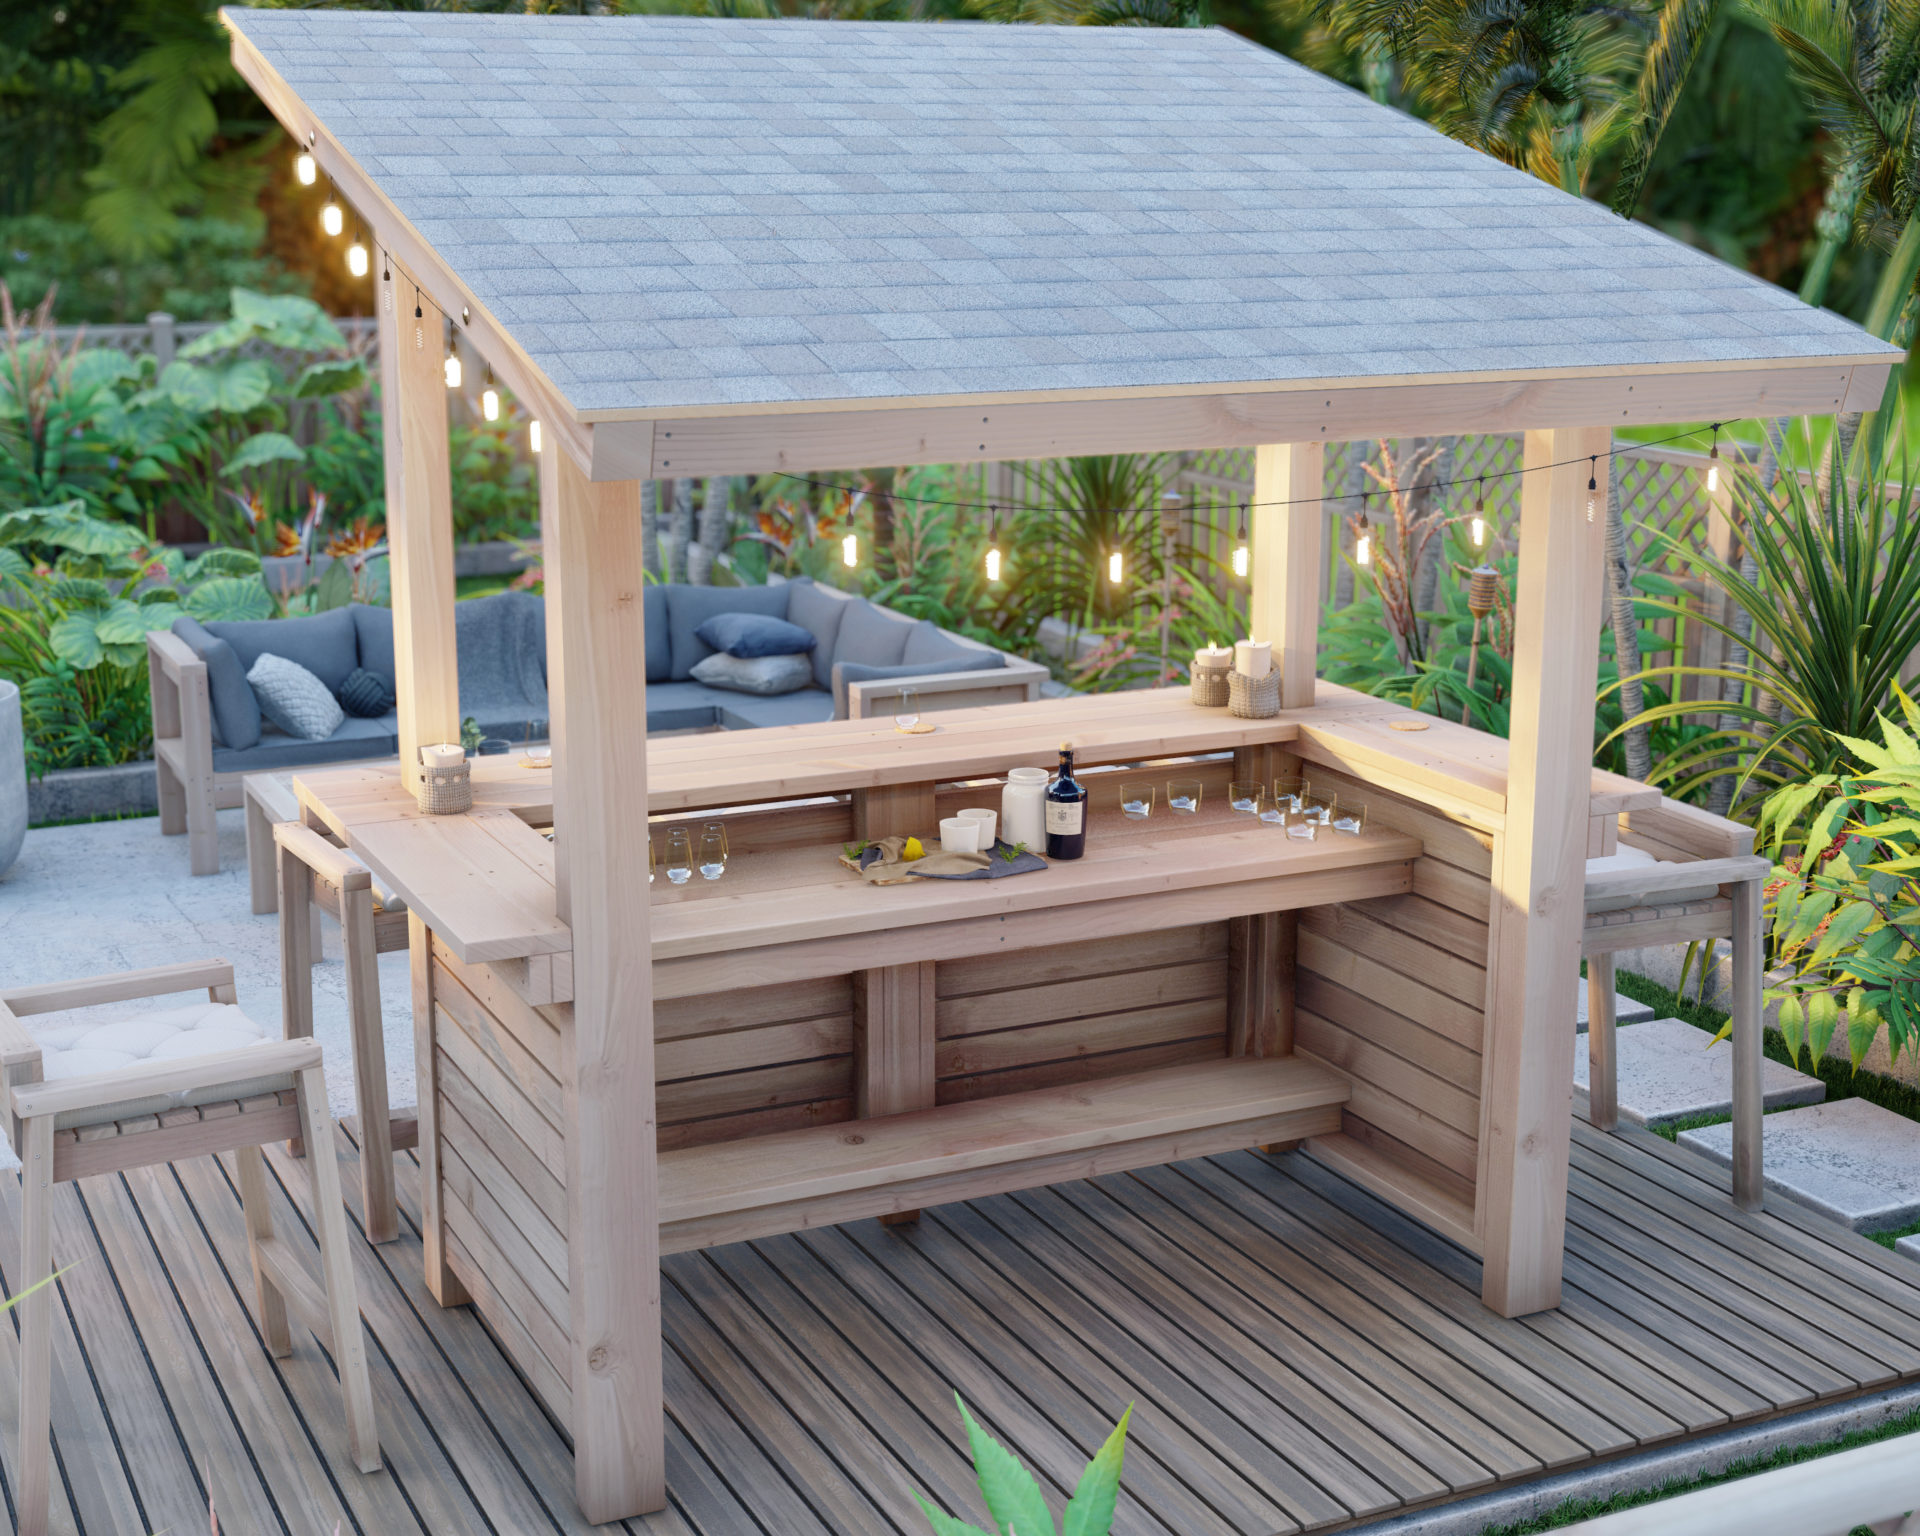 DIY outdoor bar with roof plans